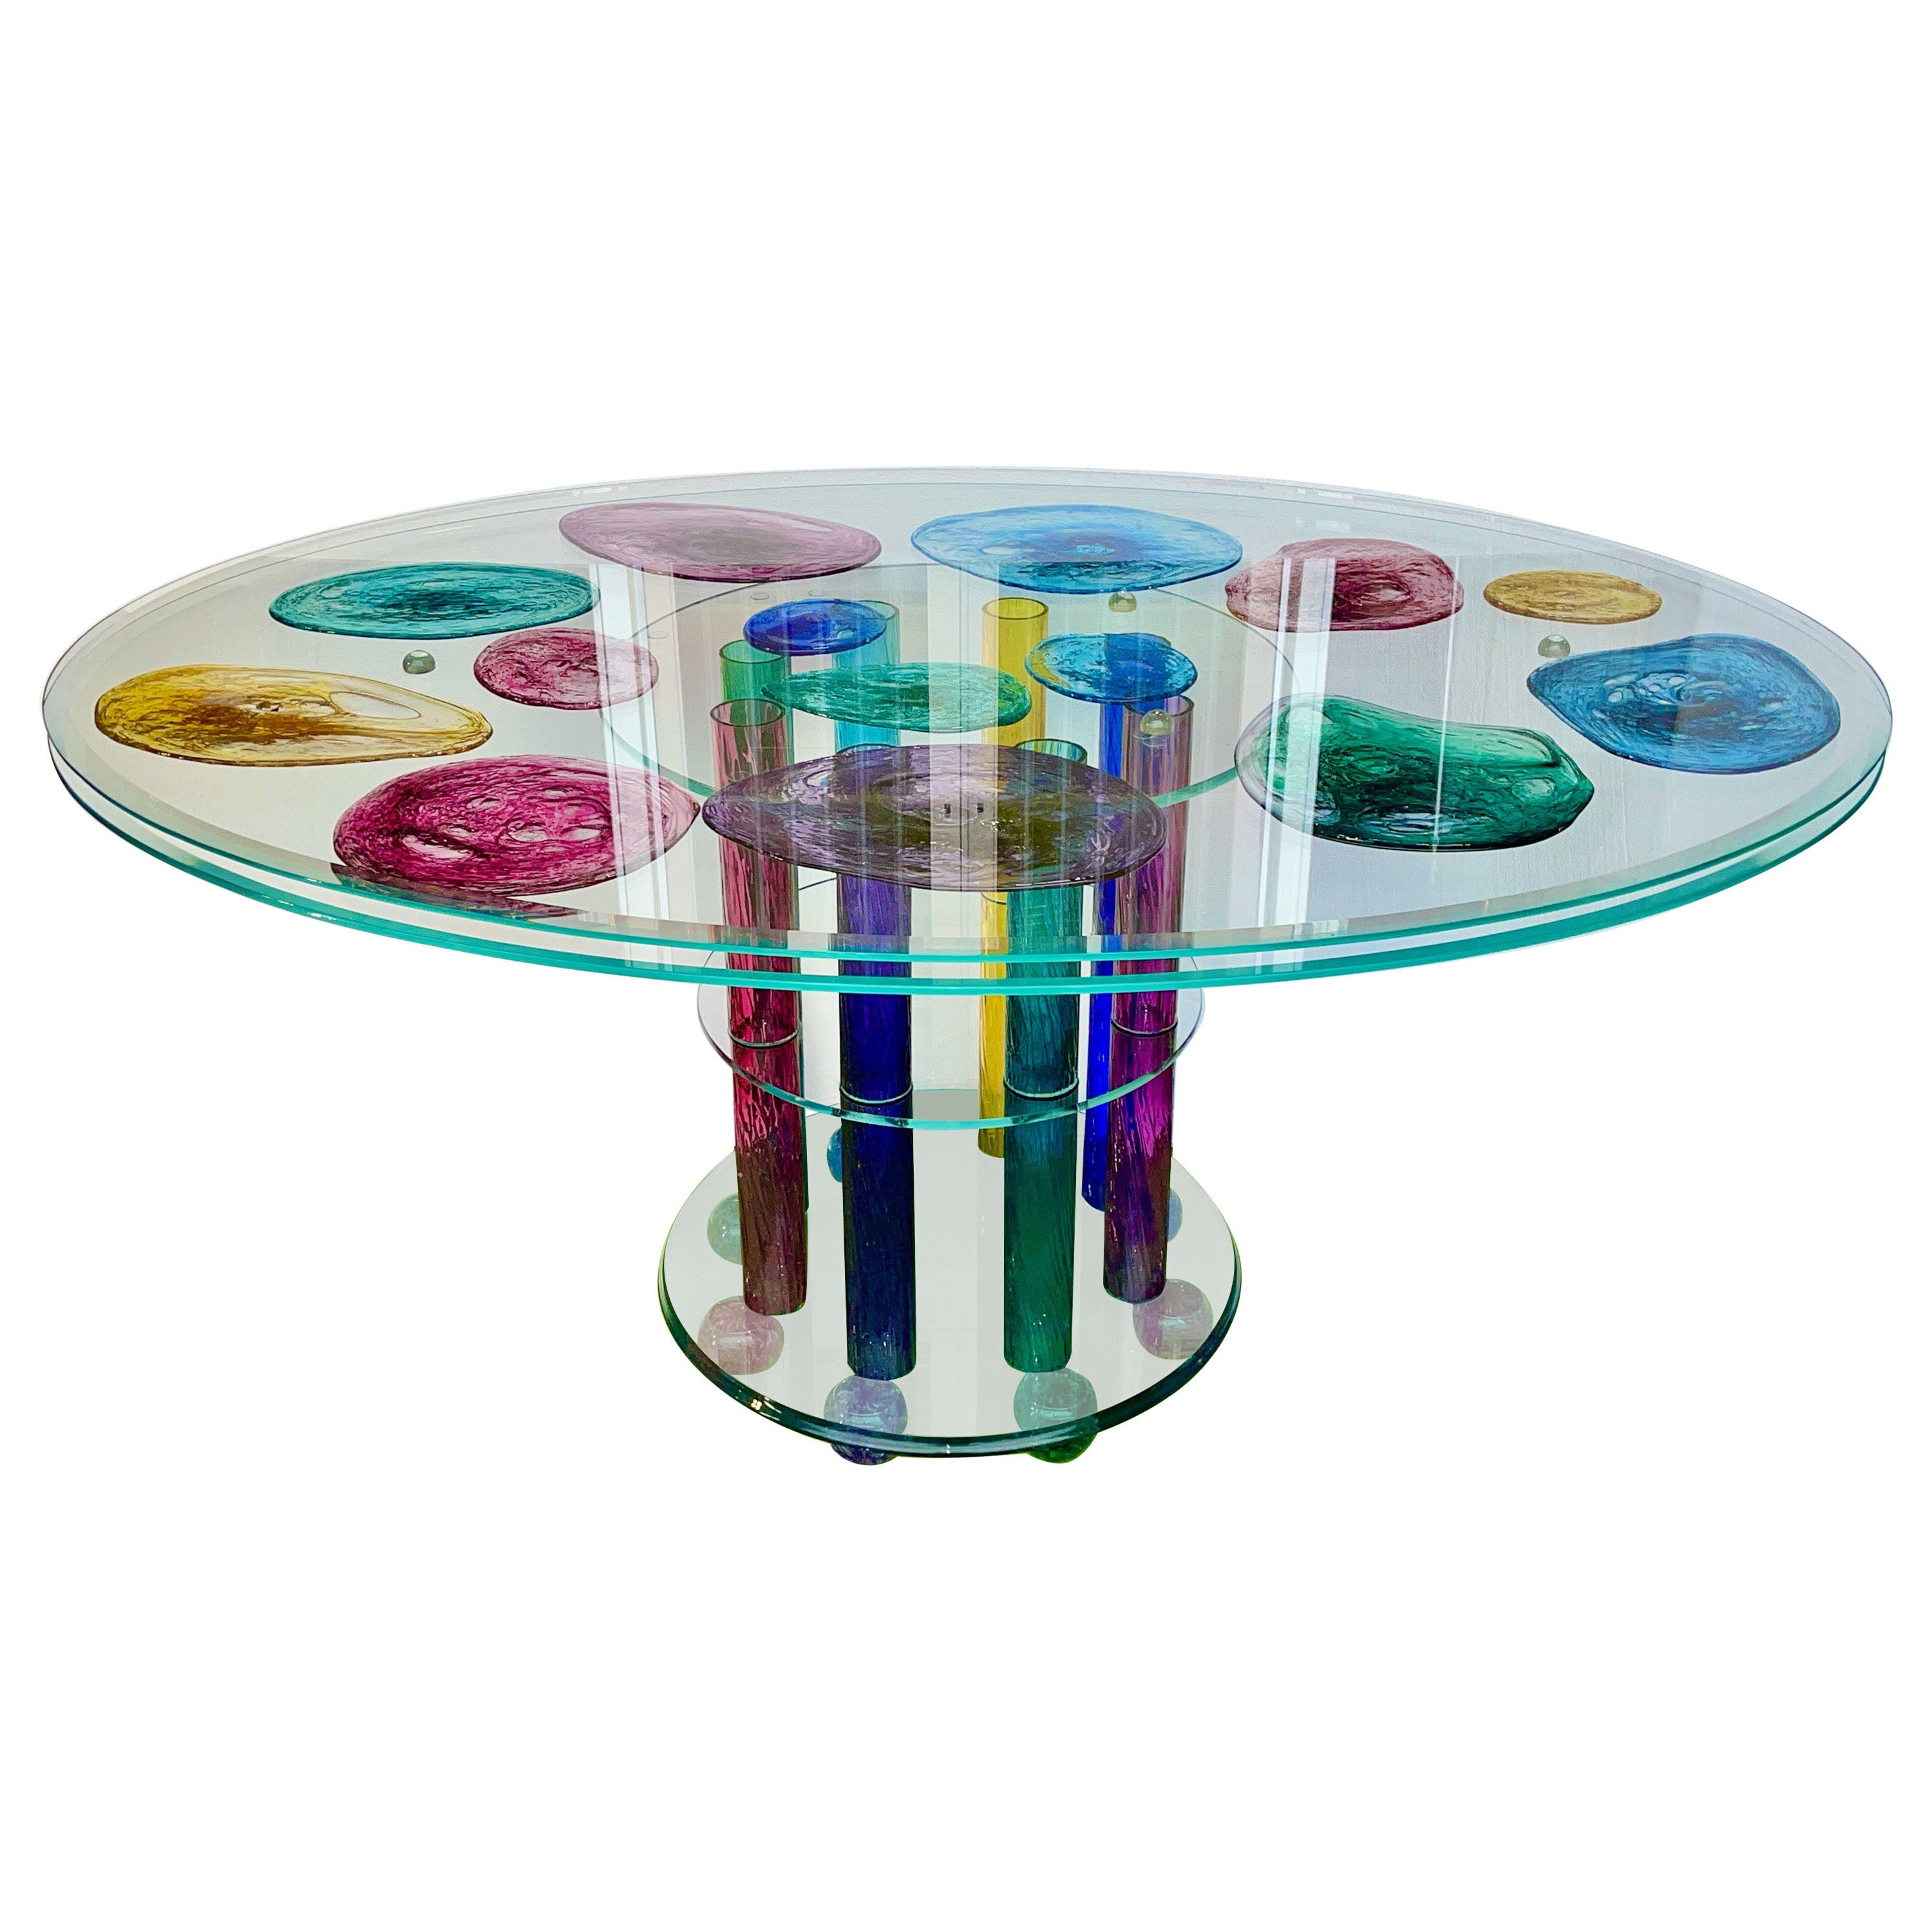 Peter Greenwood Art Glass Oval Dining Table For Sale